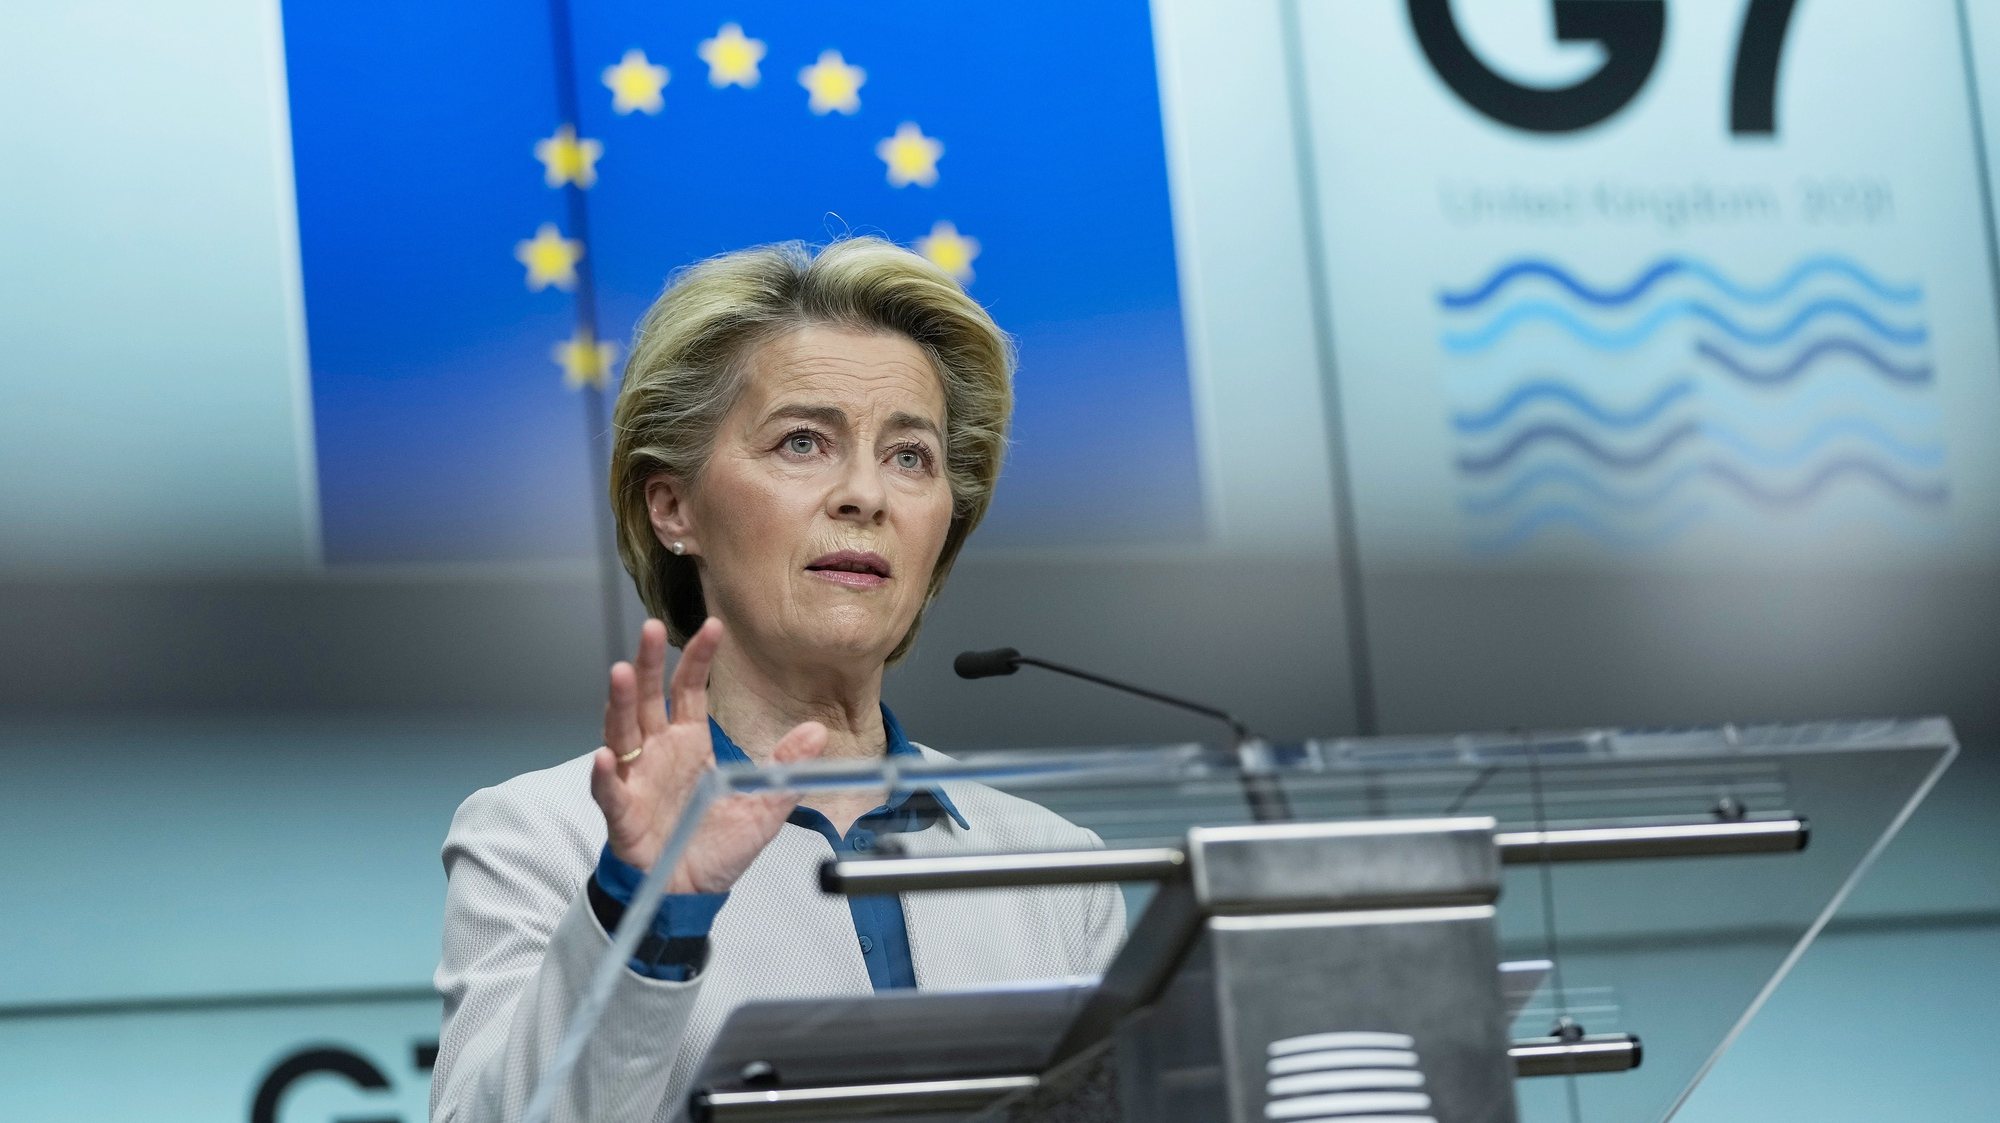 epa09259058 European Commission President Ursula von der Leyen speaks during a joint news conference with European Council President Charles Michel ahead of the G7 summit, at the EU headquarters in Brussels, Belgiuem, 10 June 2021. Charles Michel and Ursula von der Leyen will attend the G7 summit in Cornwall, southwest England.  EPA/Francisco Seco / POOL